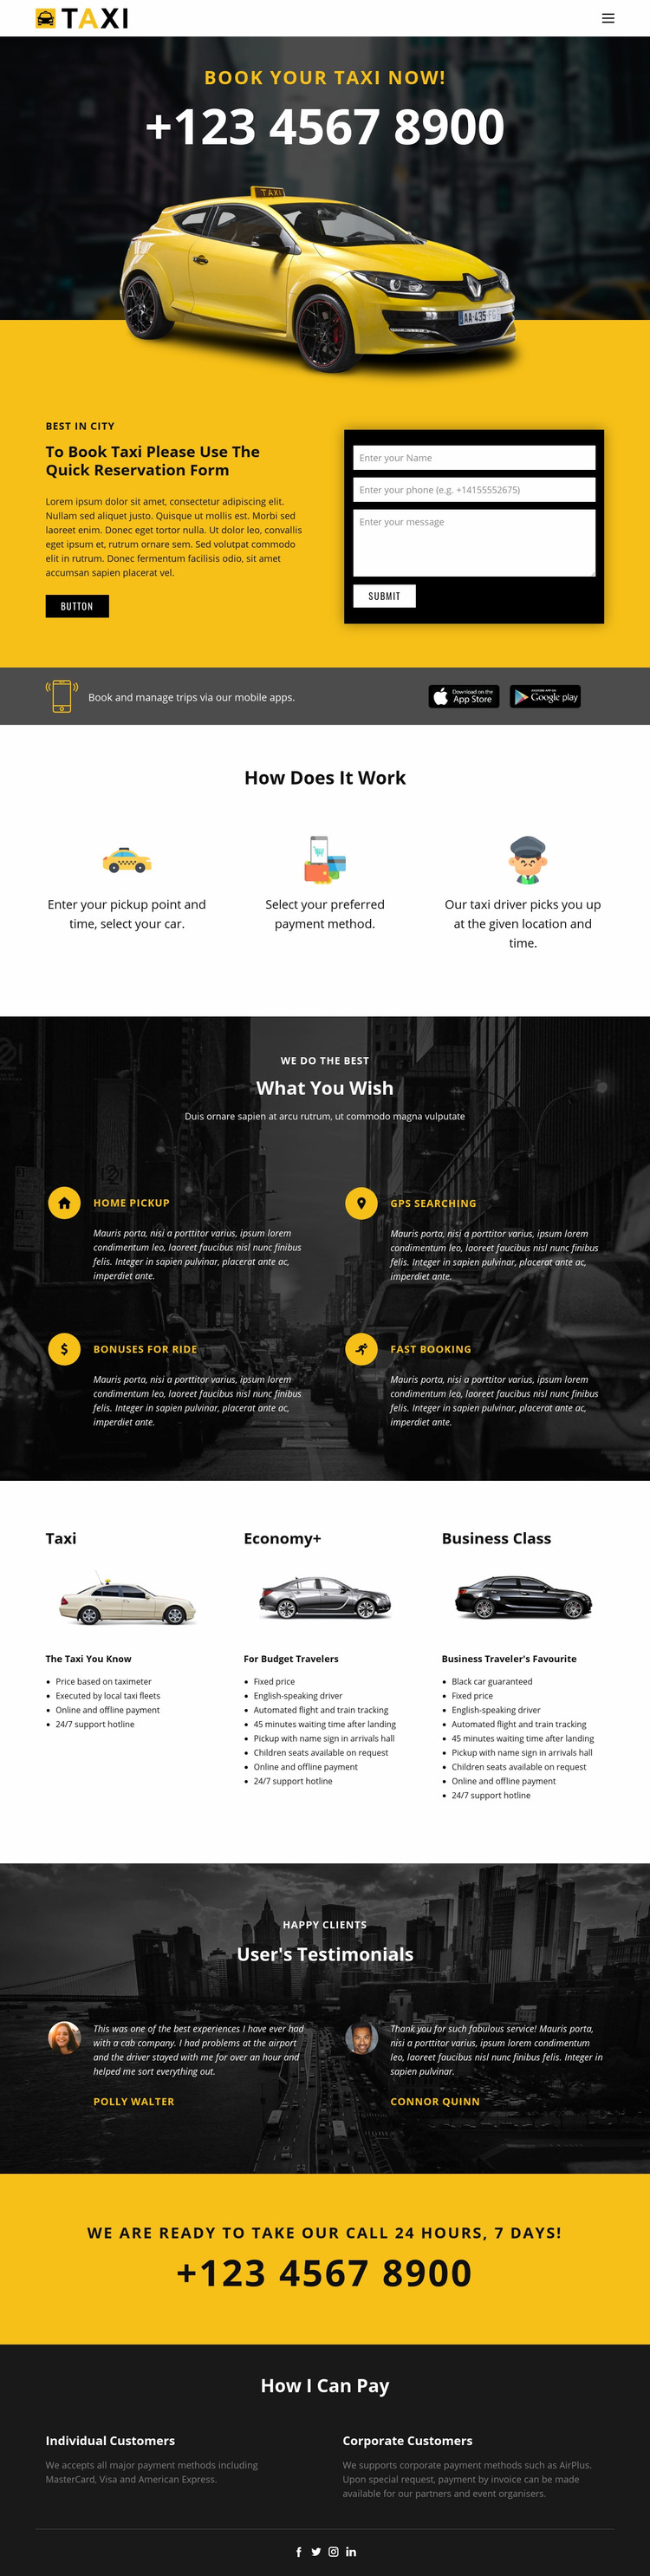 Fastest taxi cars Web Page Design